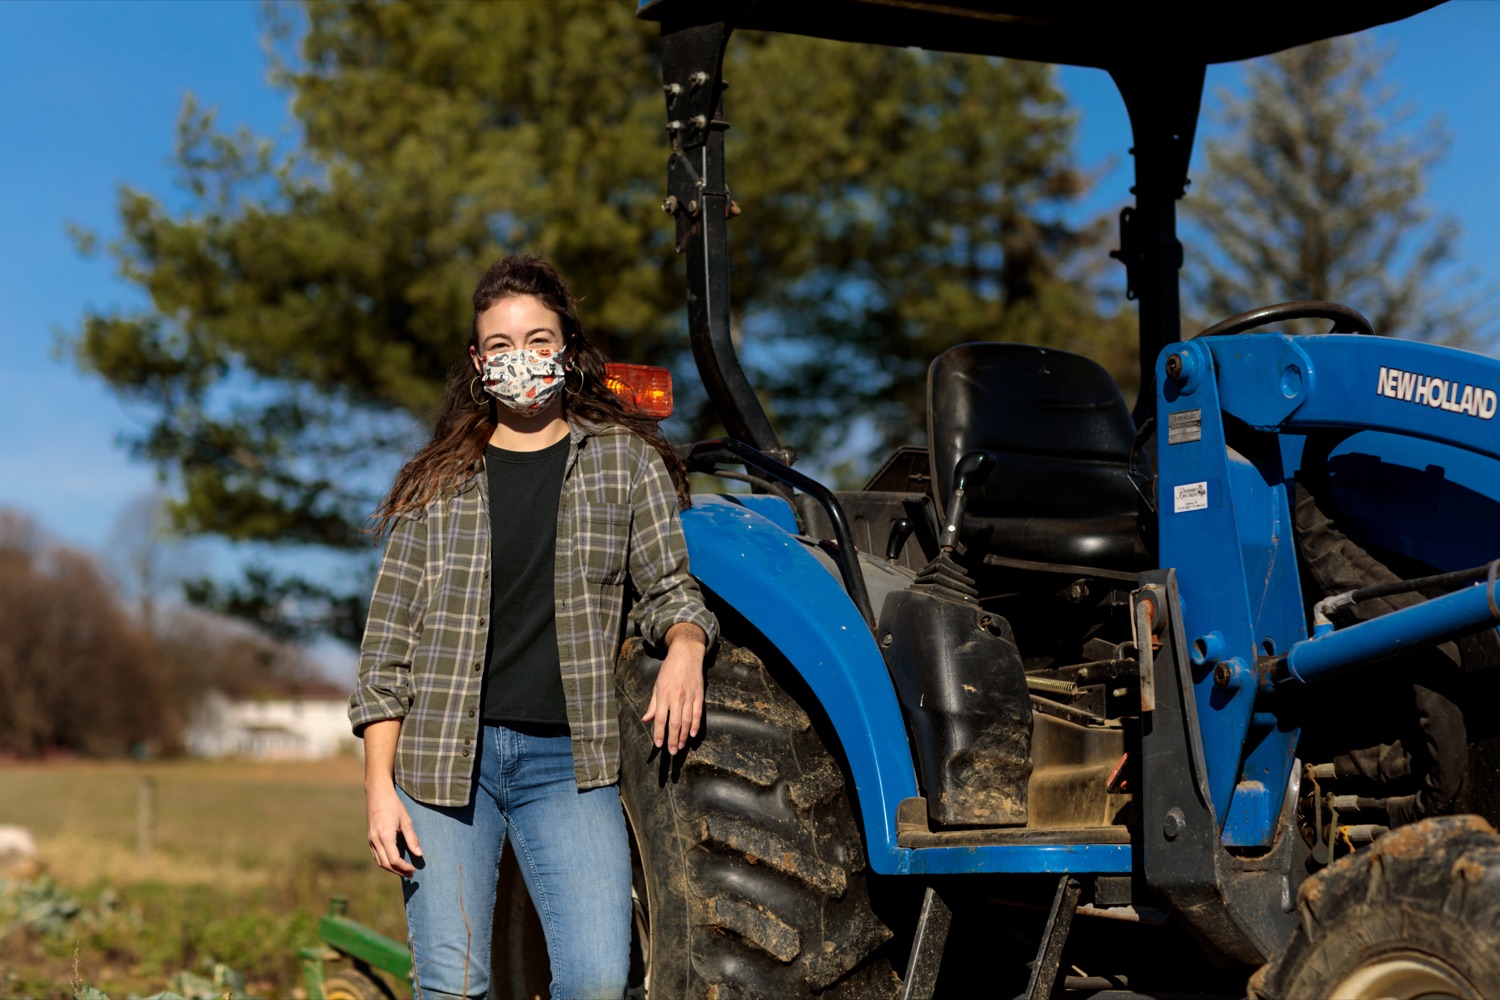 Jessi Lee Ross, 30, farm hand with Crooked Row Farm, poses for a photograph on the farm in Orefield on Friday, November 20, 2020.<br><a href="https://filesource.amperwave.net/commonwealthofpa/photo/18325_AGRIC_Farm_Show_NK_016.jpg" target="_blank">⇣ Download Photo</a>